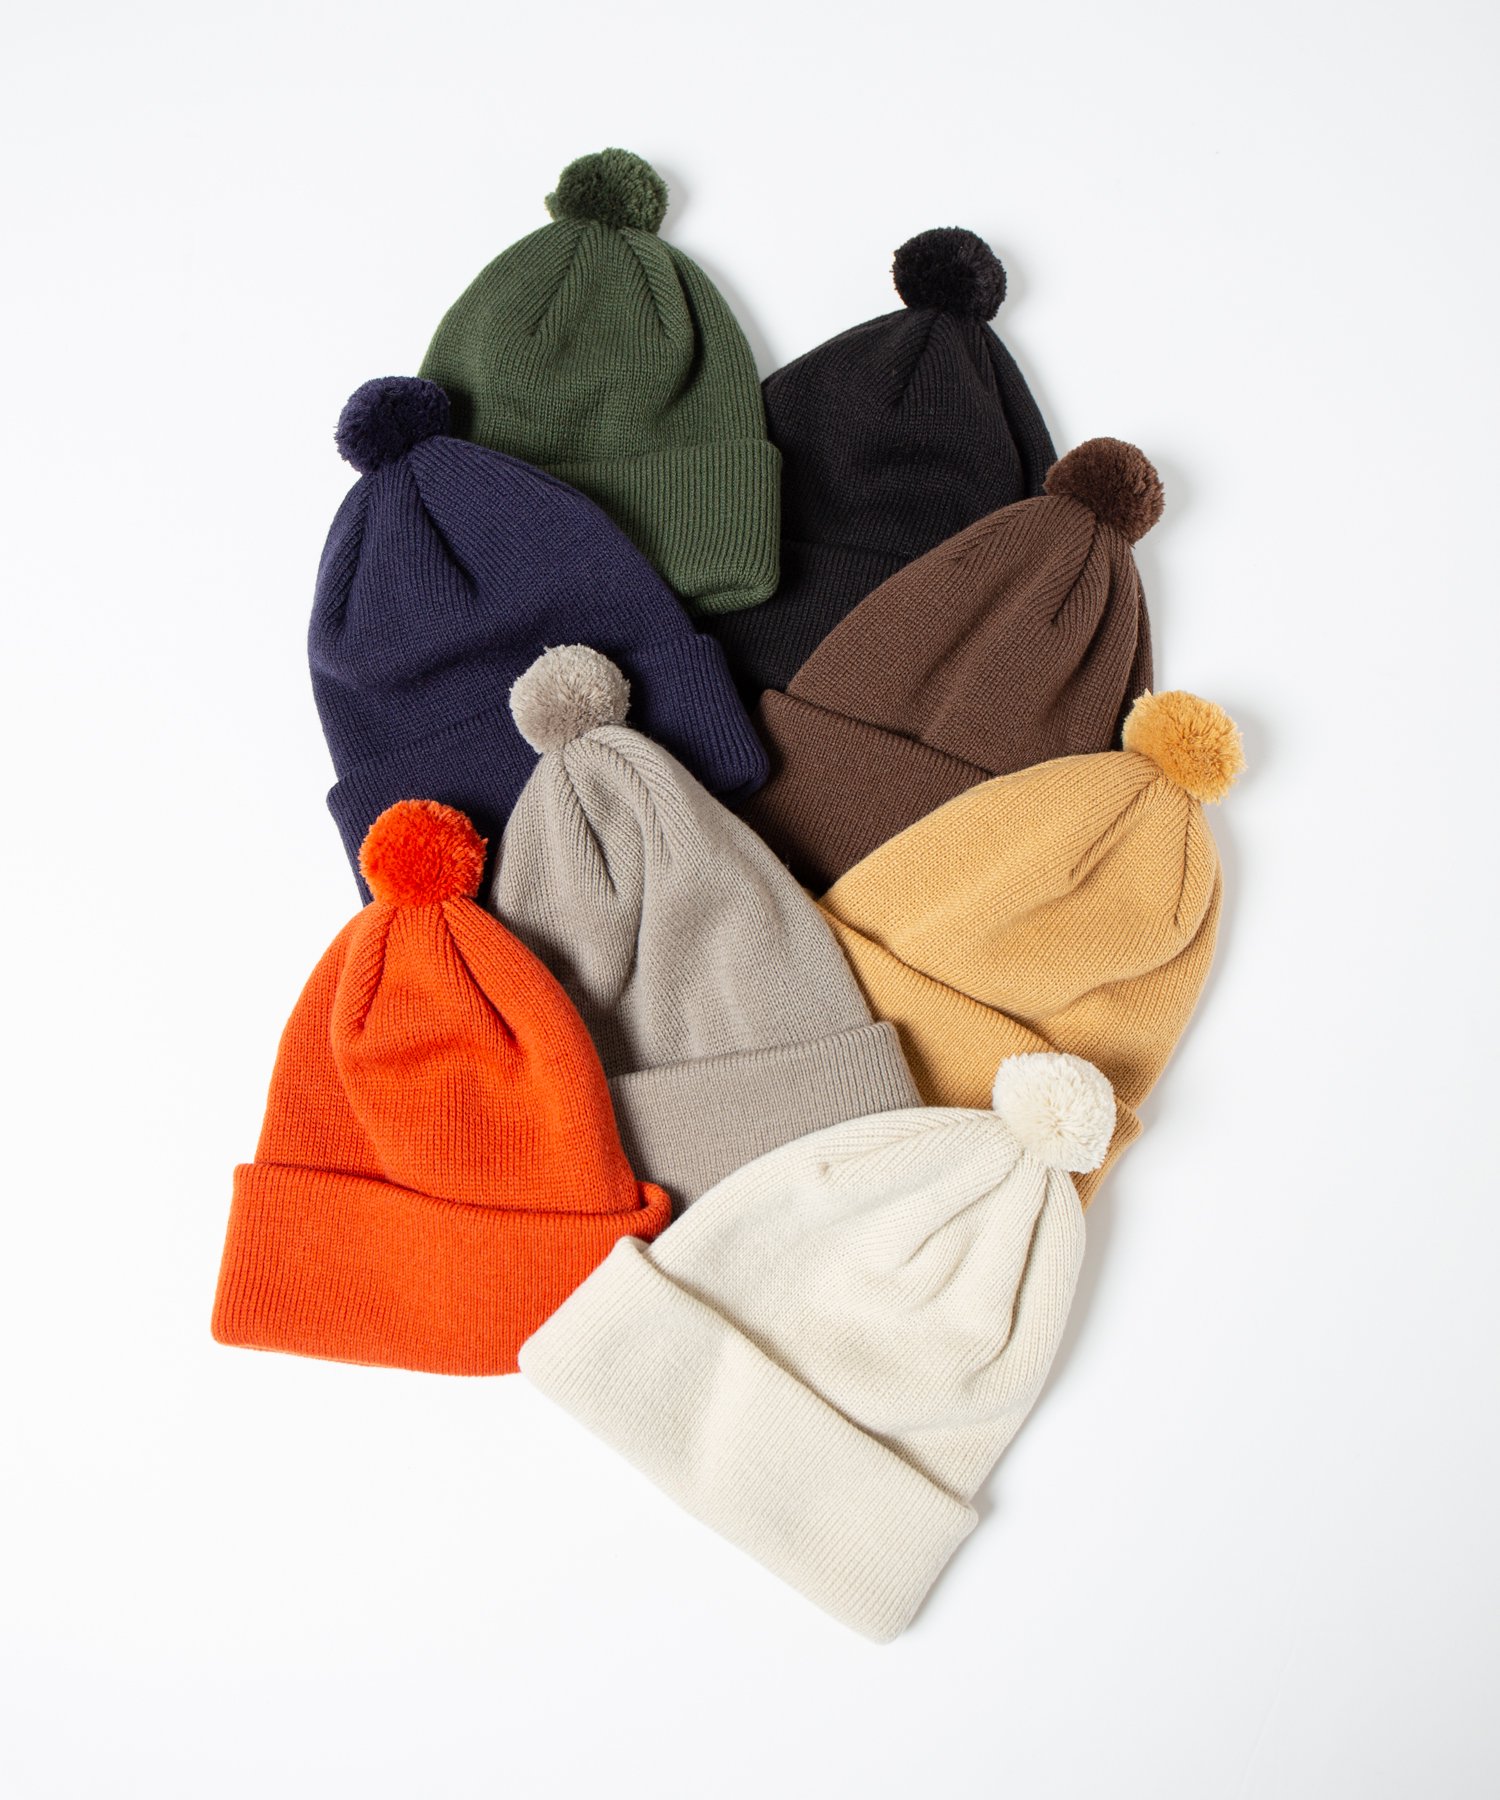 <img class='new_mark_img1' src='https://img.shop-pro.jp/img/new/icons15.gif' style='border:none;display:inline;margin:0px;padding:0px;width:auto;' />【Racal】 Ponpon knit cap / ポンポン付きニットキャップ